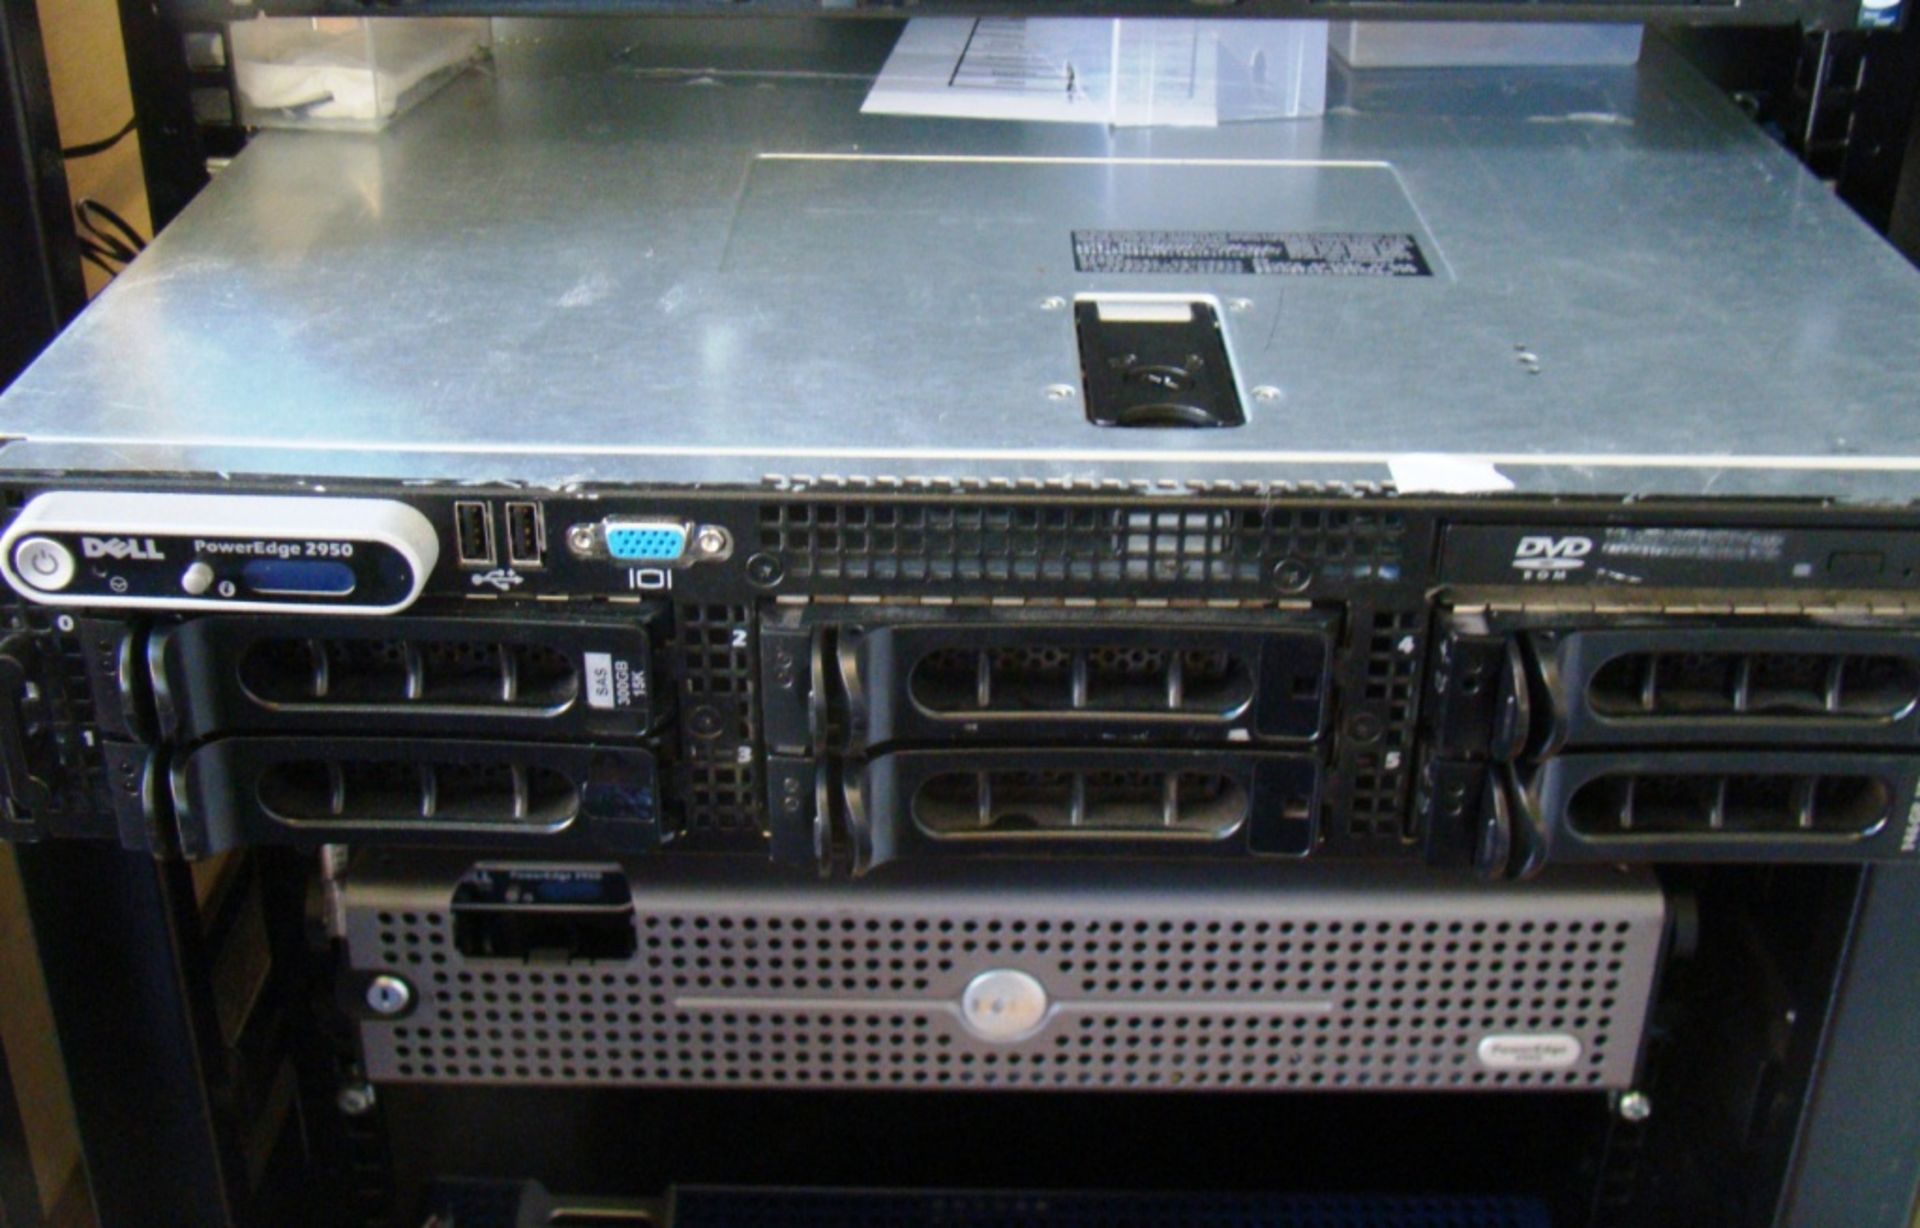 Dell 2950 PowerEdge 2 * 2.66Ghz Quad Core 1333Mhz , 22GB 667 Mhz Memory, 1 * 67Gb HDD, 1 *